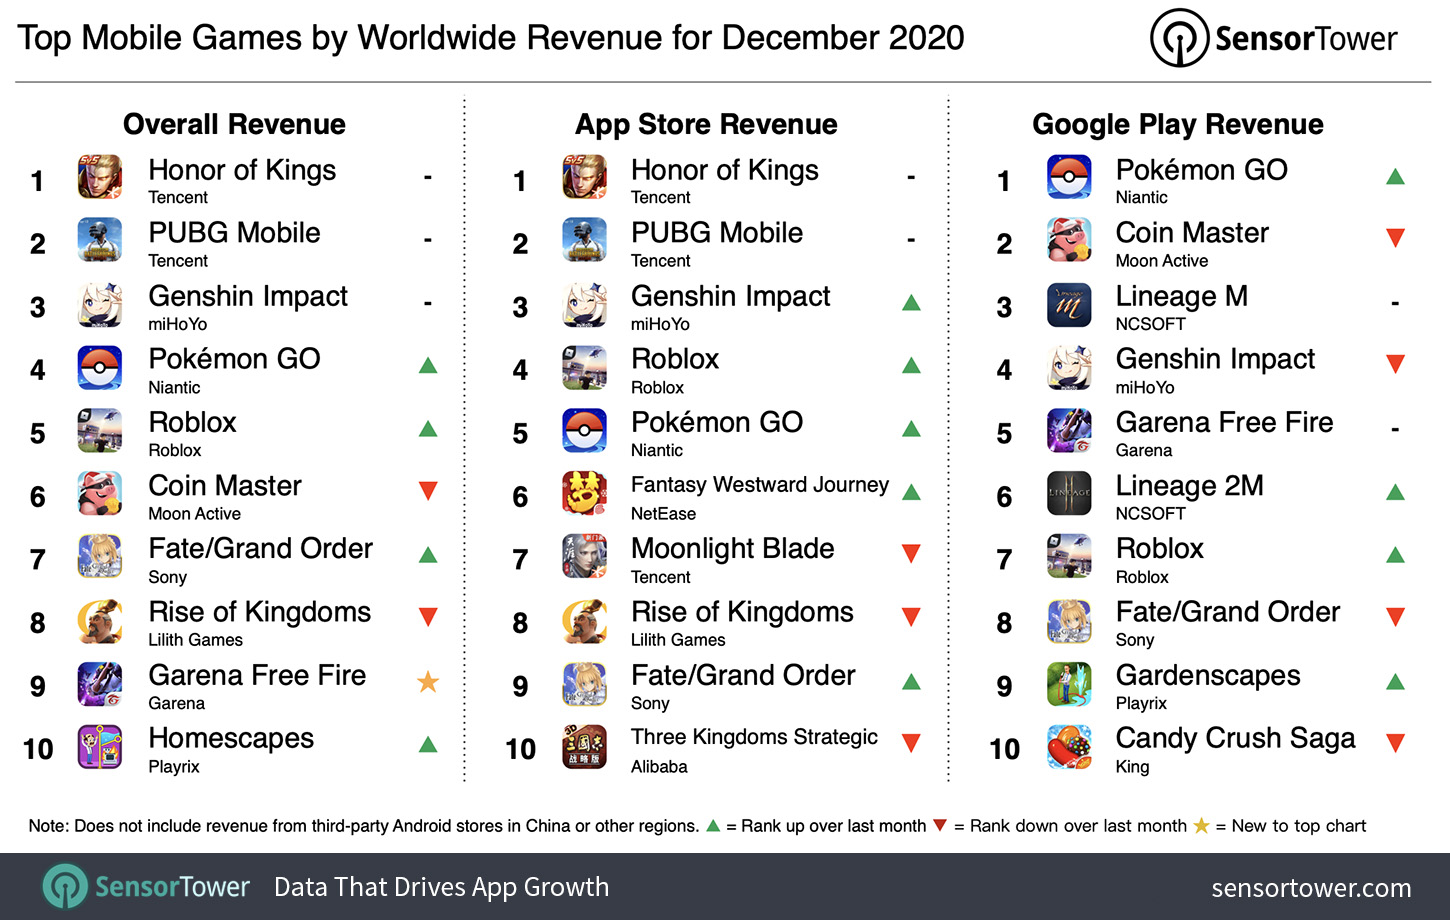 “Top Grossing Mobile Games Worldwide for December 2020